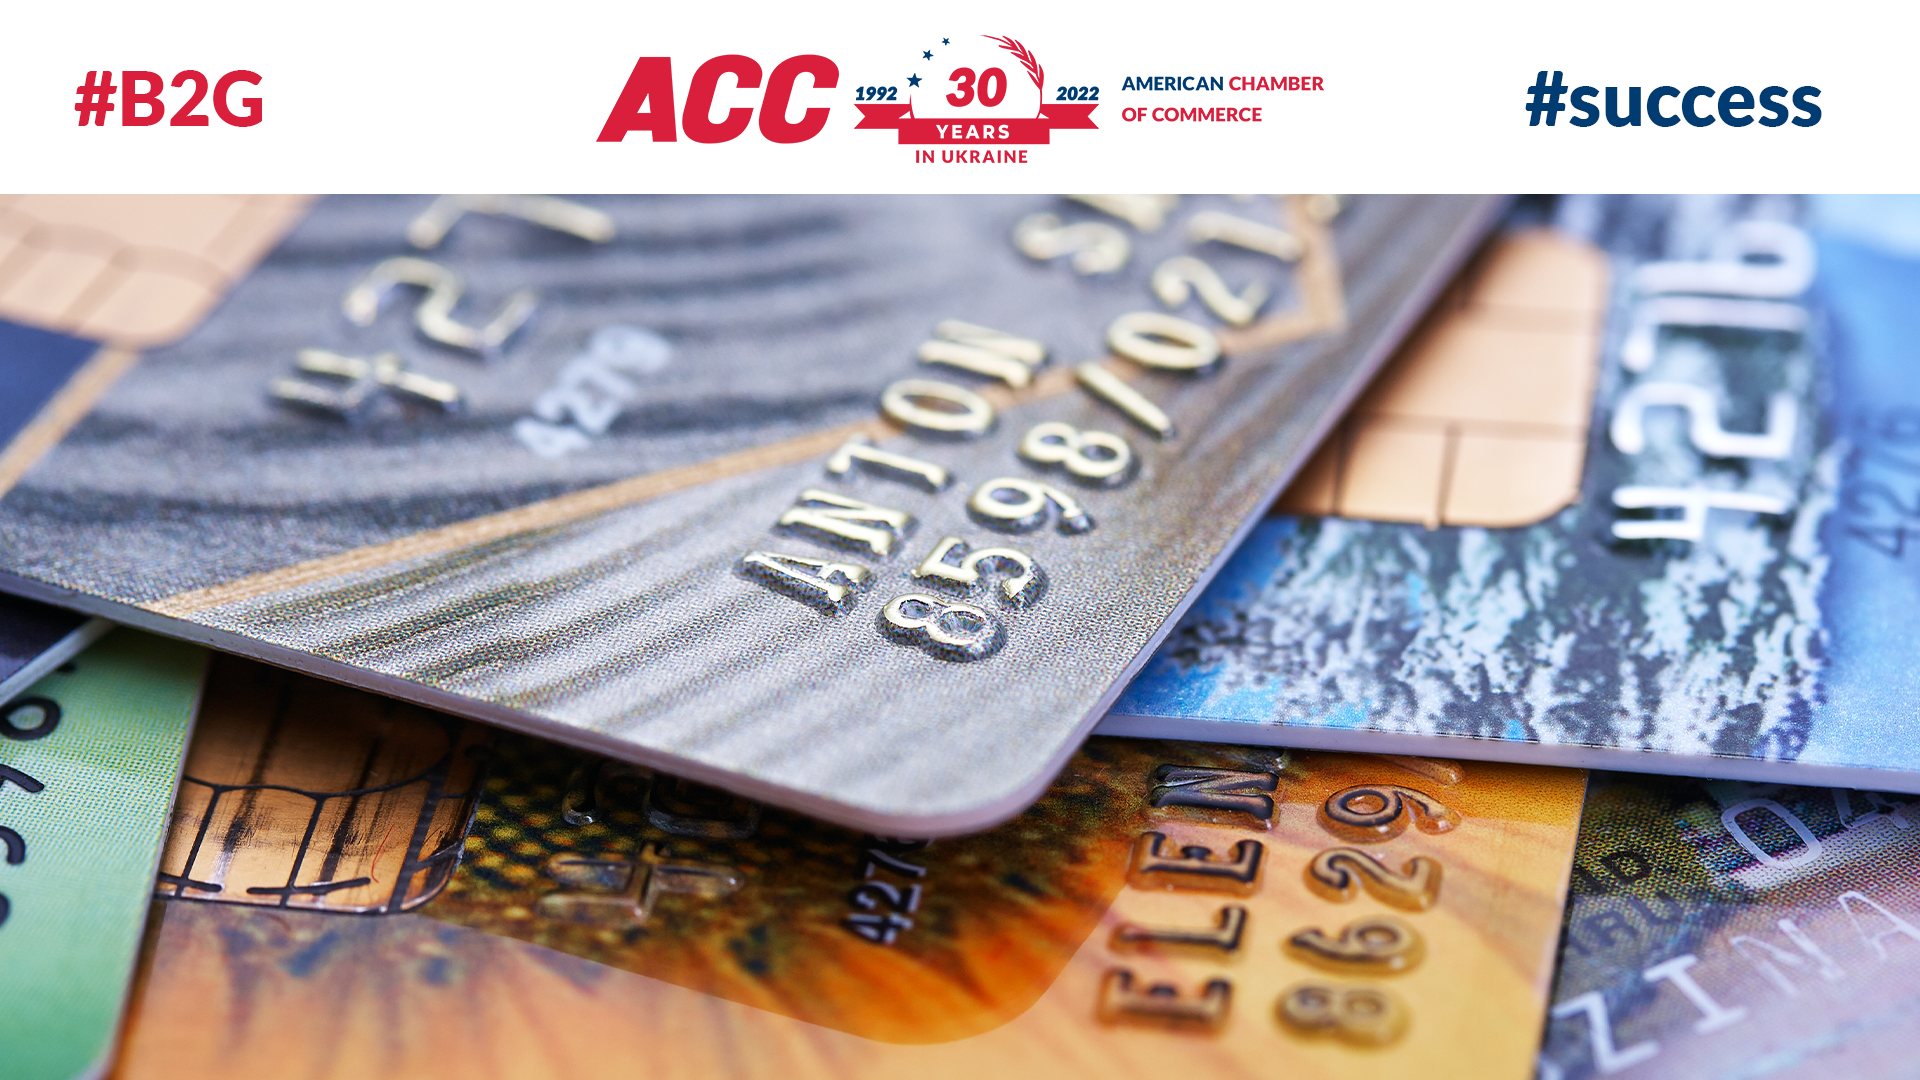 Policy Progress: The National Bank of Ukraine Simplified Some Currency Restrictions on the Use of Corporate Cards